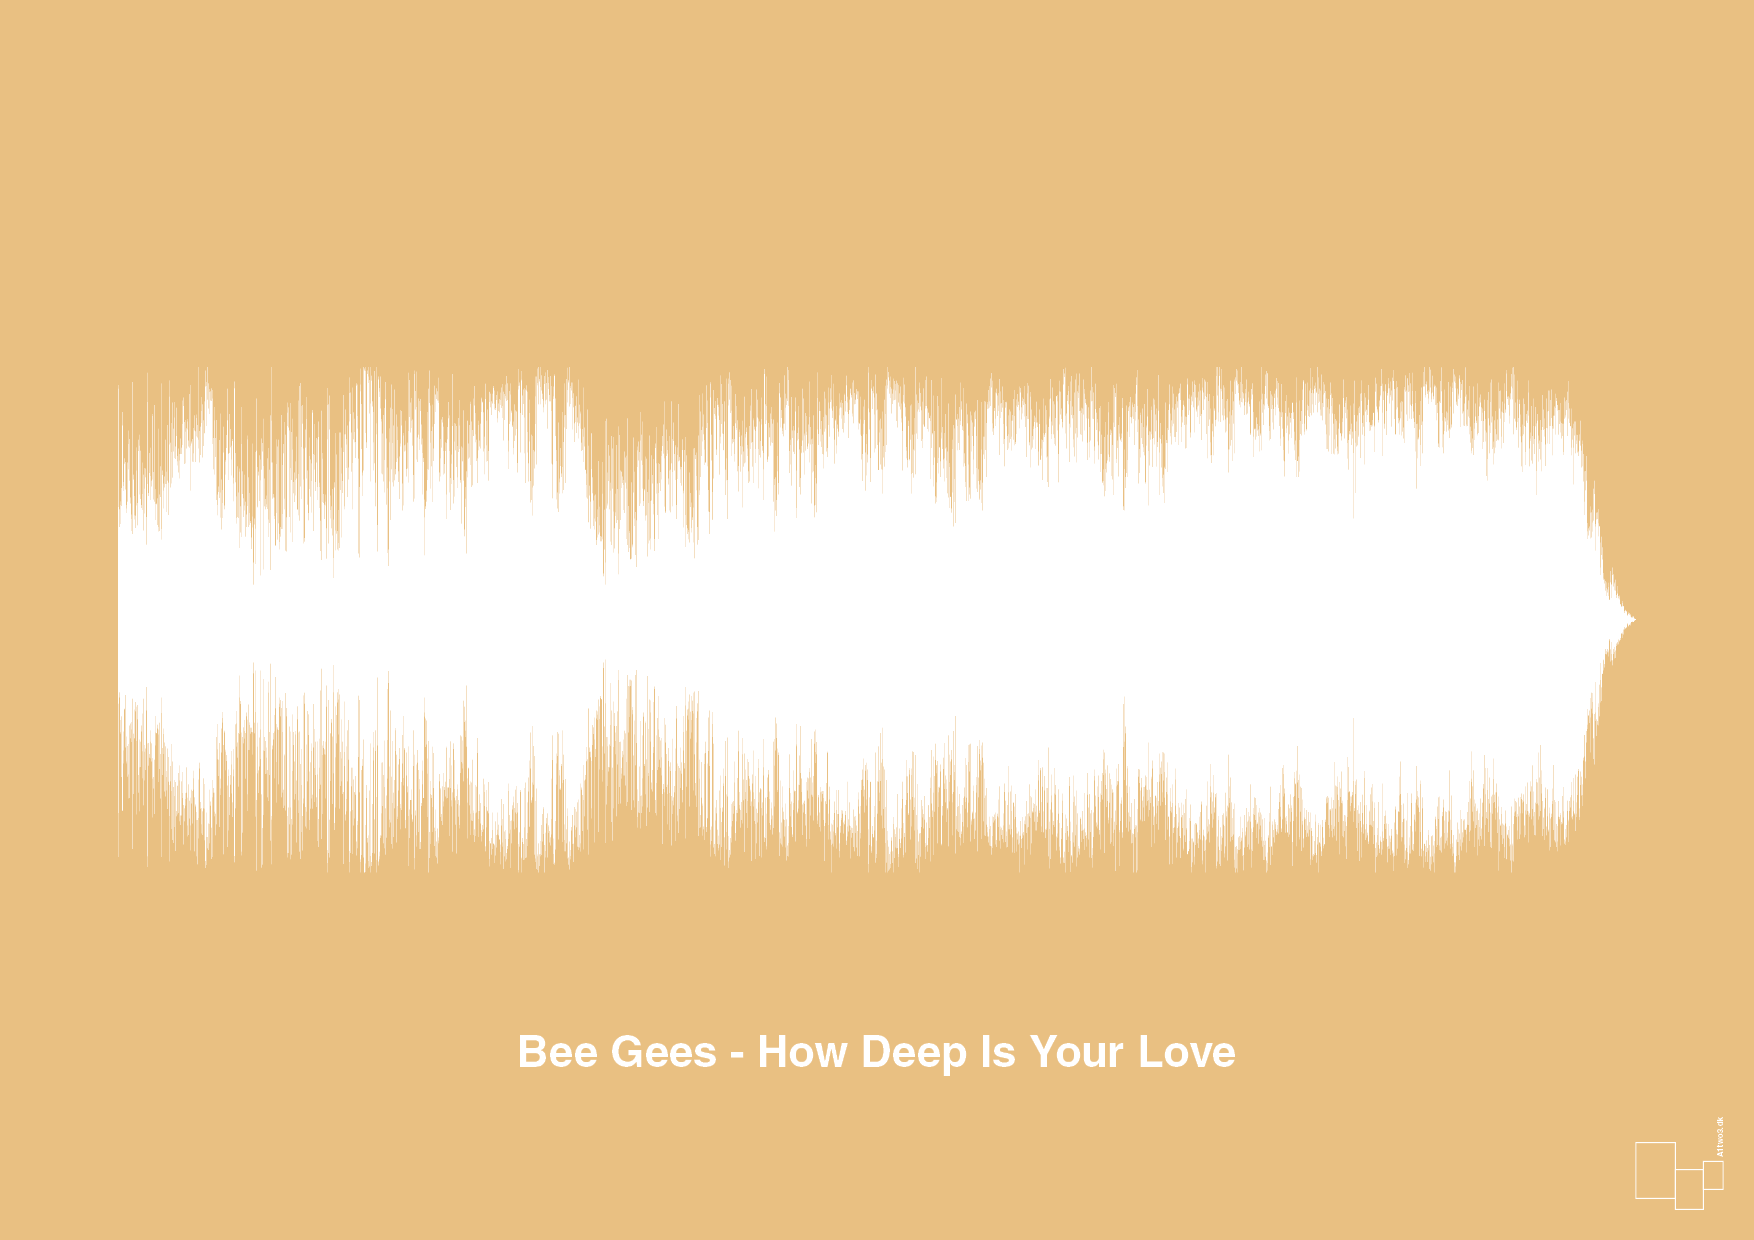 bee gees - how deep is your love - Plakat med Musik i Charismatic